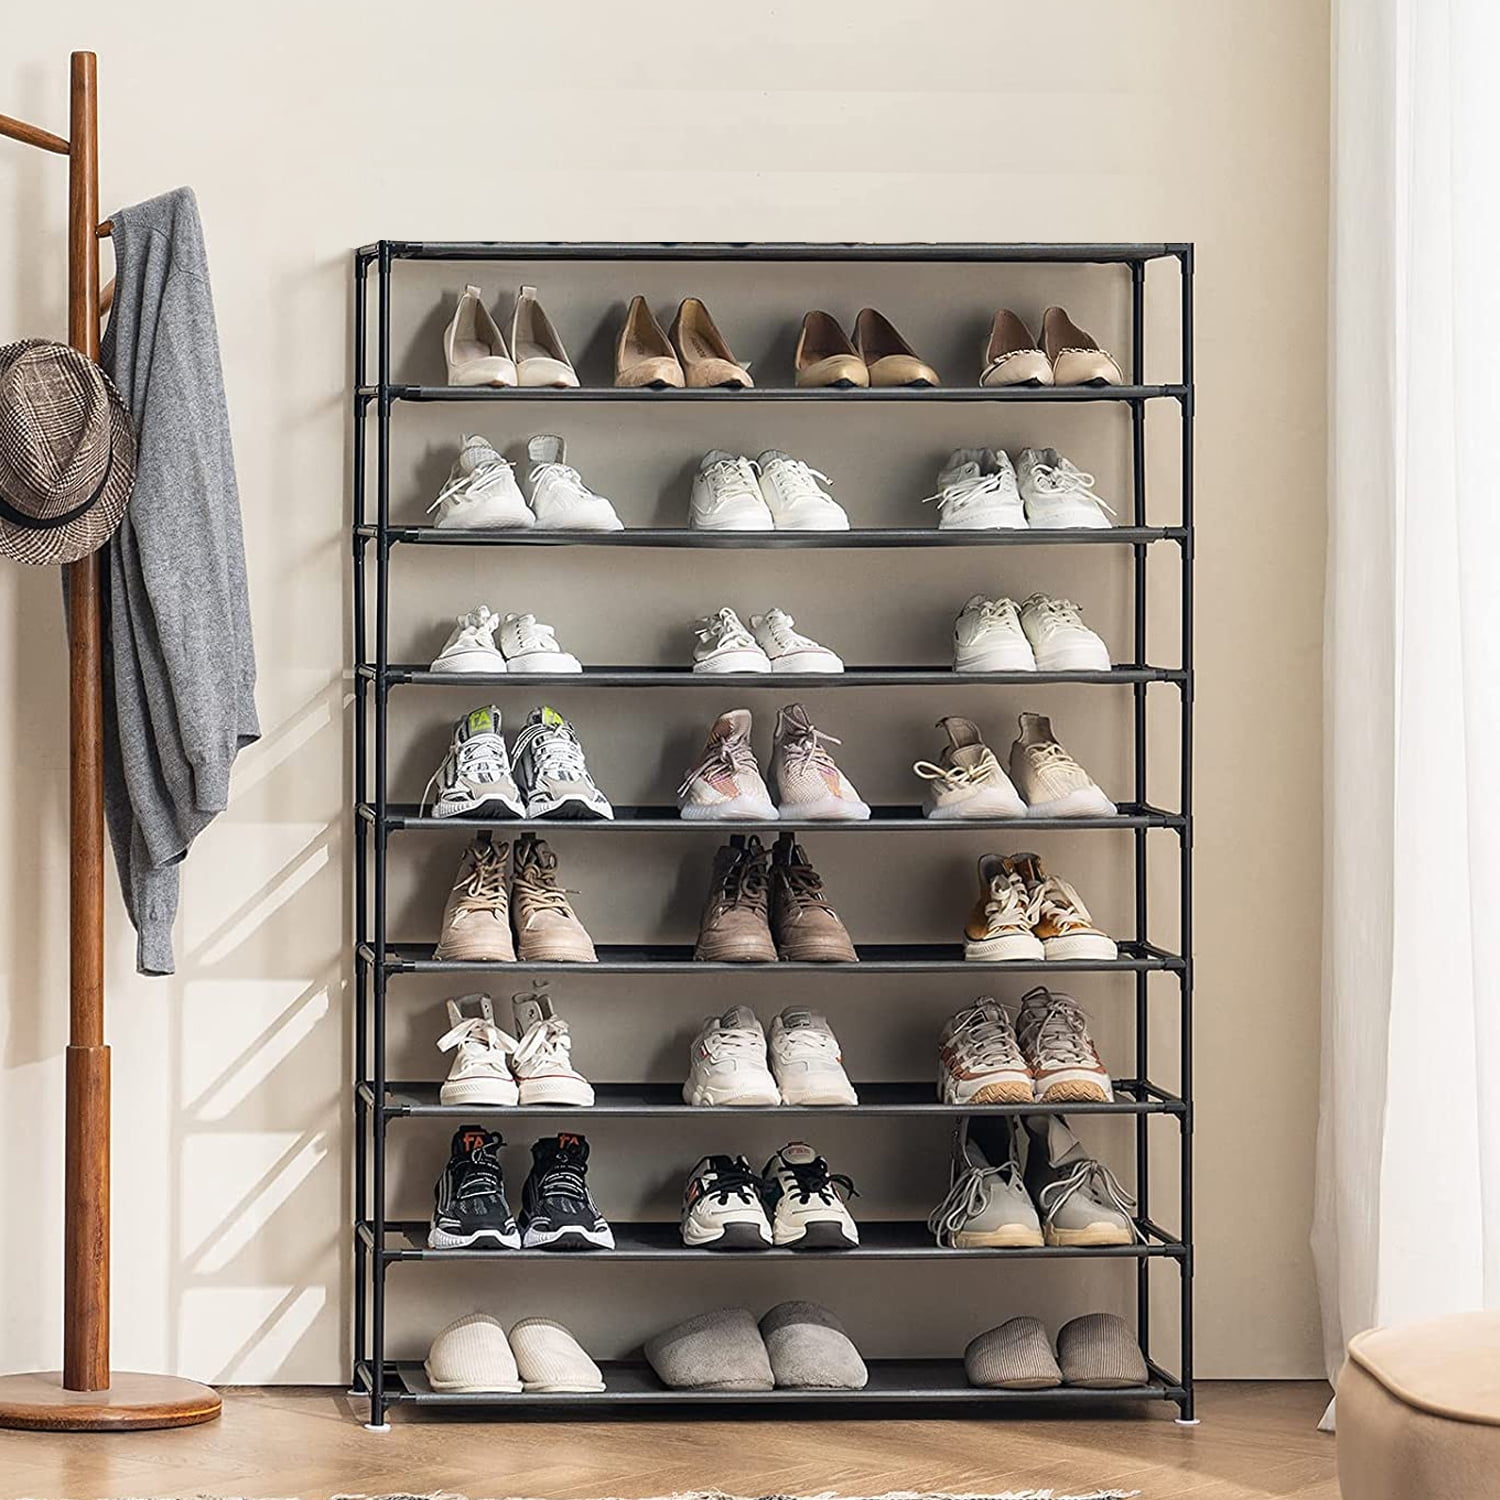  LVNIUS Large Tall Shoe Rack With Covers Shoes Closet 9-Tier  40-46 Pairs, Sneaker Organizer Cabinet Closed Shoe Shelves Shoe Stand Holder  For Garage Bedroom,Zapateras, 50 Pares : Home & Kitchen